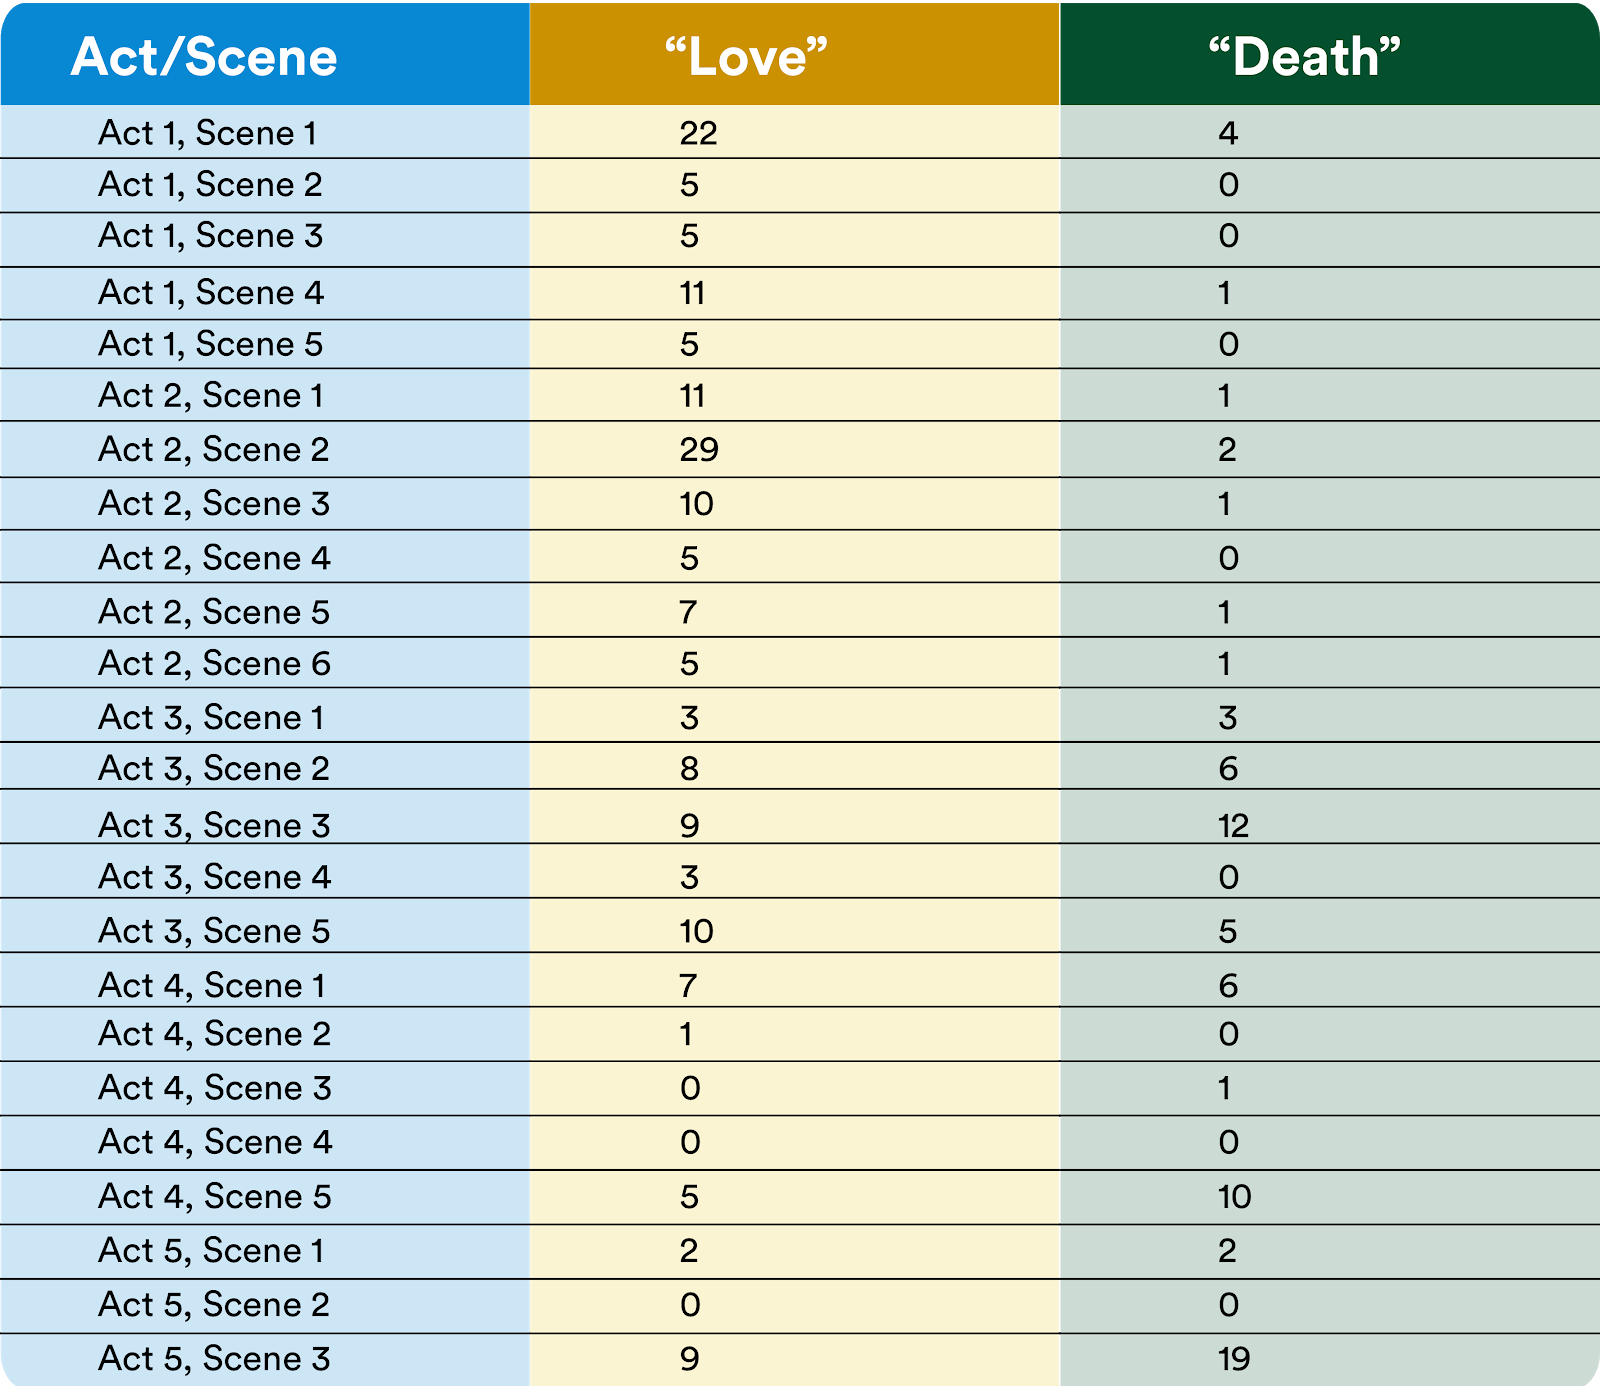 This table shows the frequency of the words “love” and “death” in Romeo & Juliet.